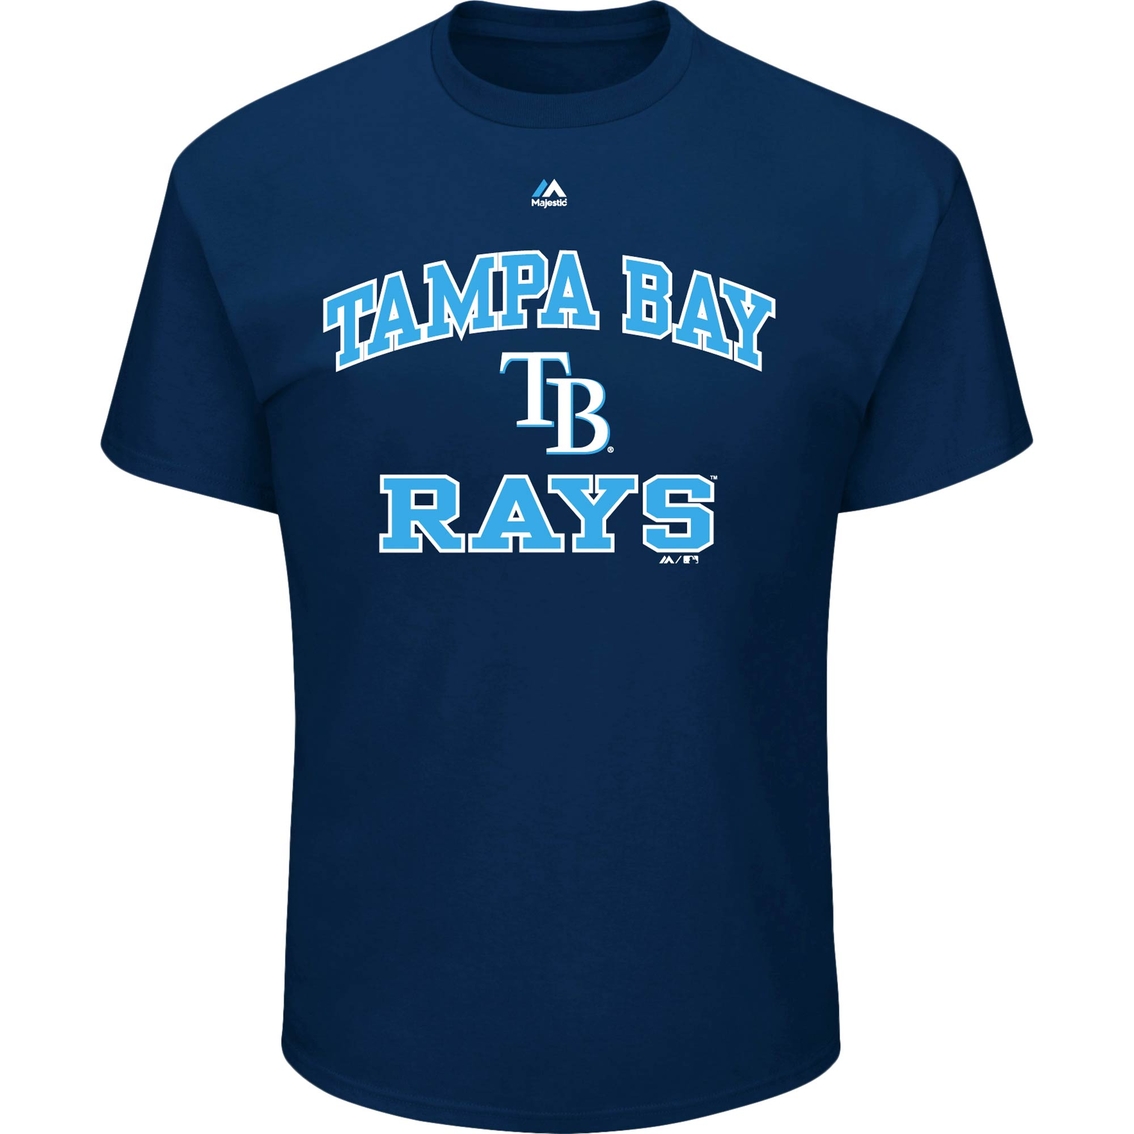 Majestic Athletic MLB Tampa Bay Rays Heart Soul Tee - Image 2 of 3